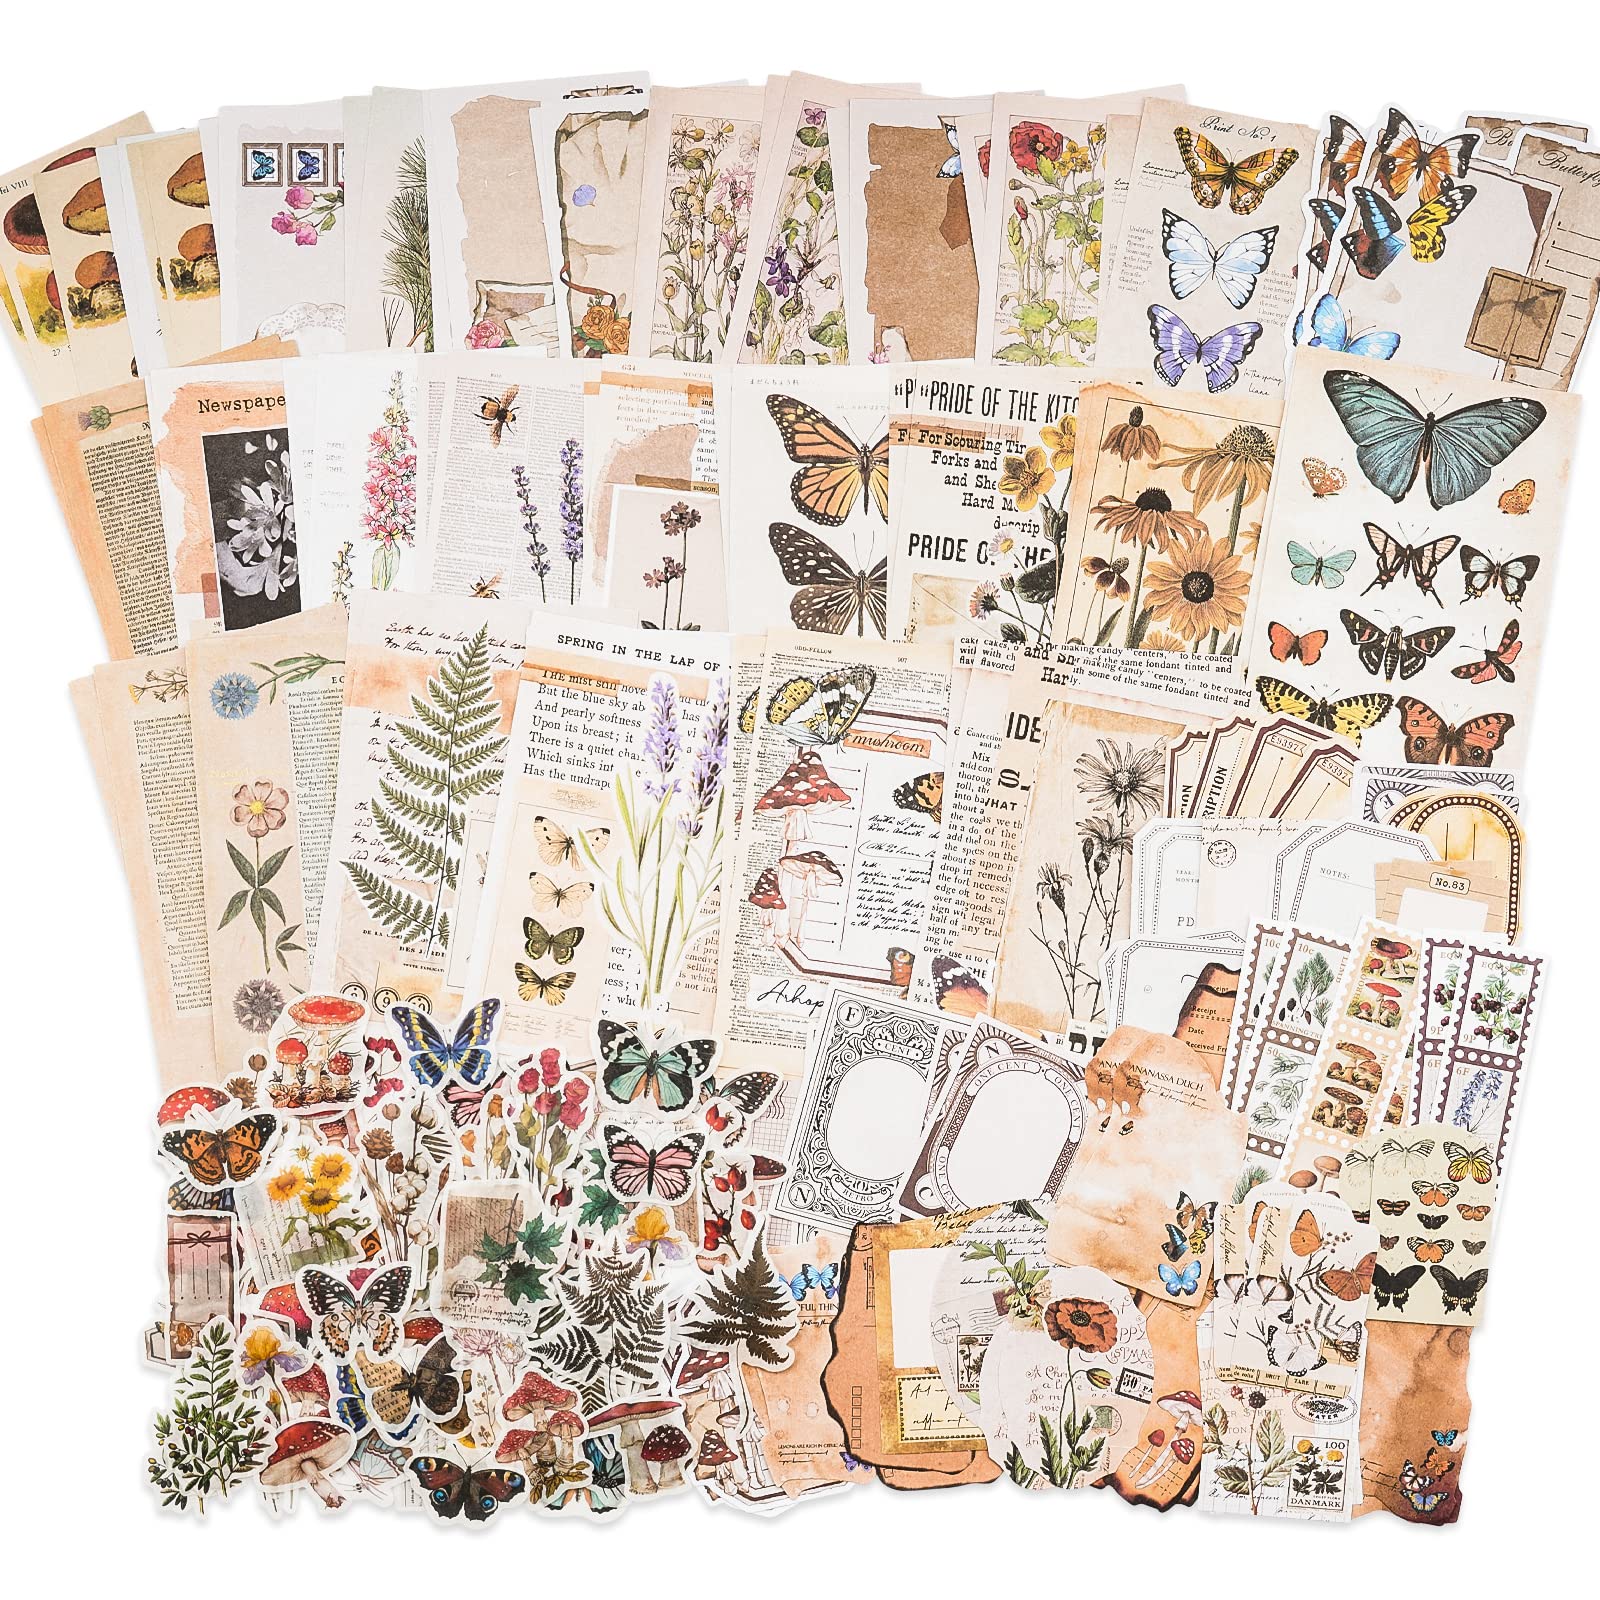 Sticker Book the Age of All Things Stickers 50 Decorative Stickers  Scrapbook Supplies Aesthetic Stickers Retro Stickers Collage 